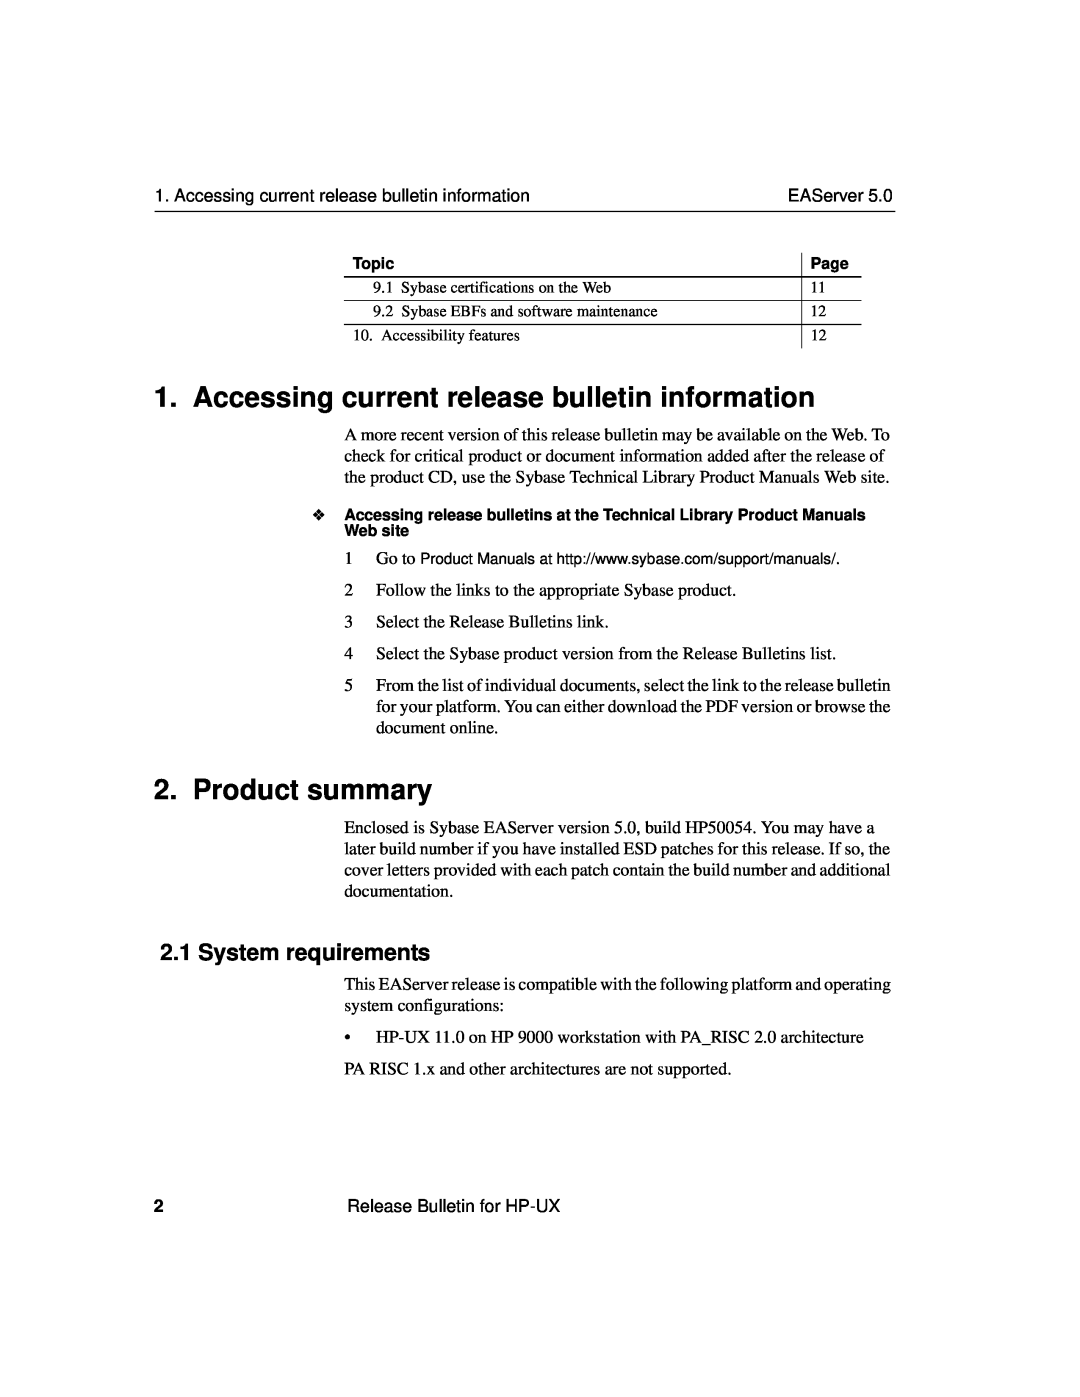 Sybase DC38029-01-0500-01 dimensions Accessing current release bulletin information, Product summary, System requirements 